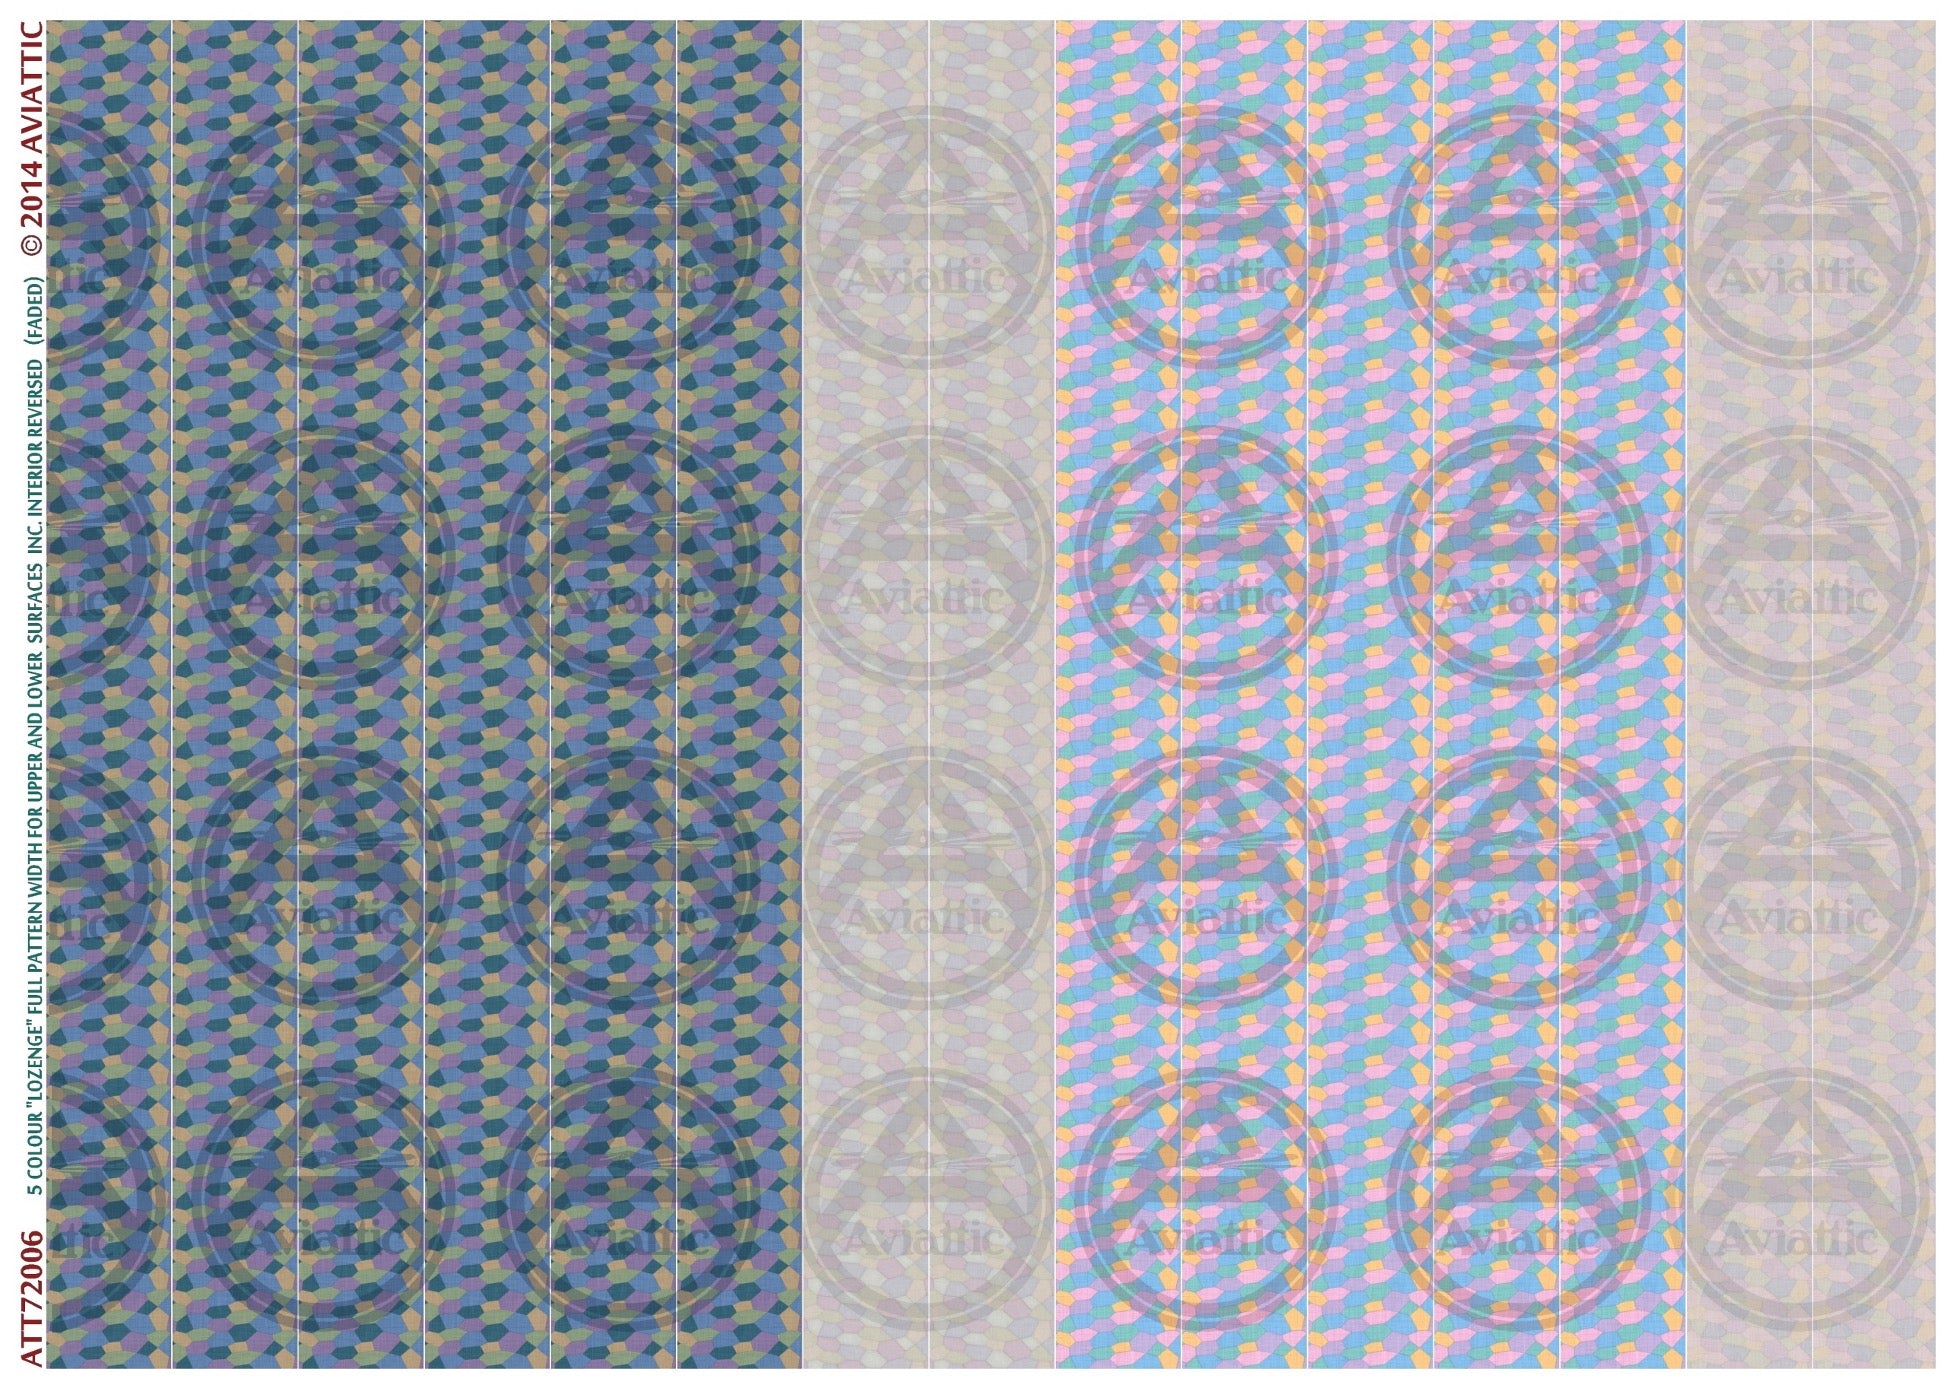 1/72 - 5 colour lozenge - full pattern - upper and lower surfaces - incl. interior reversed - faded